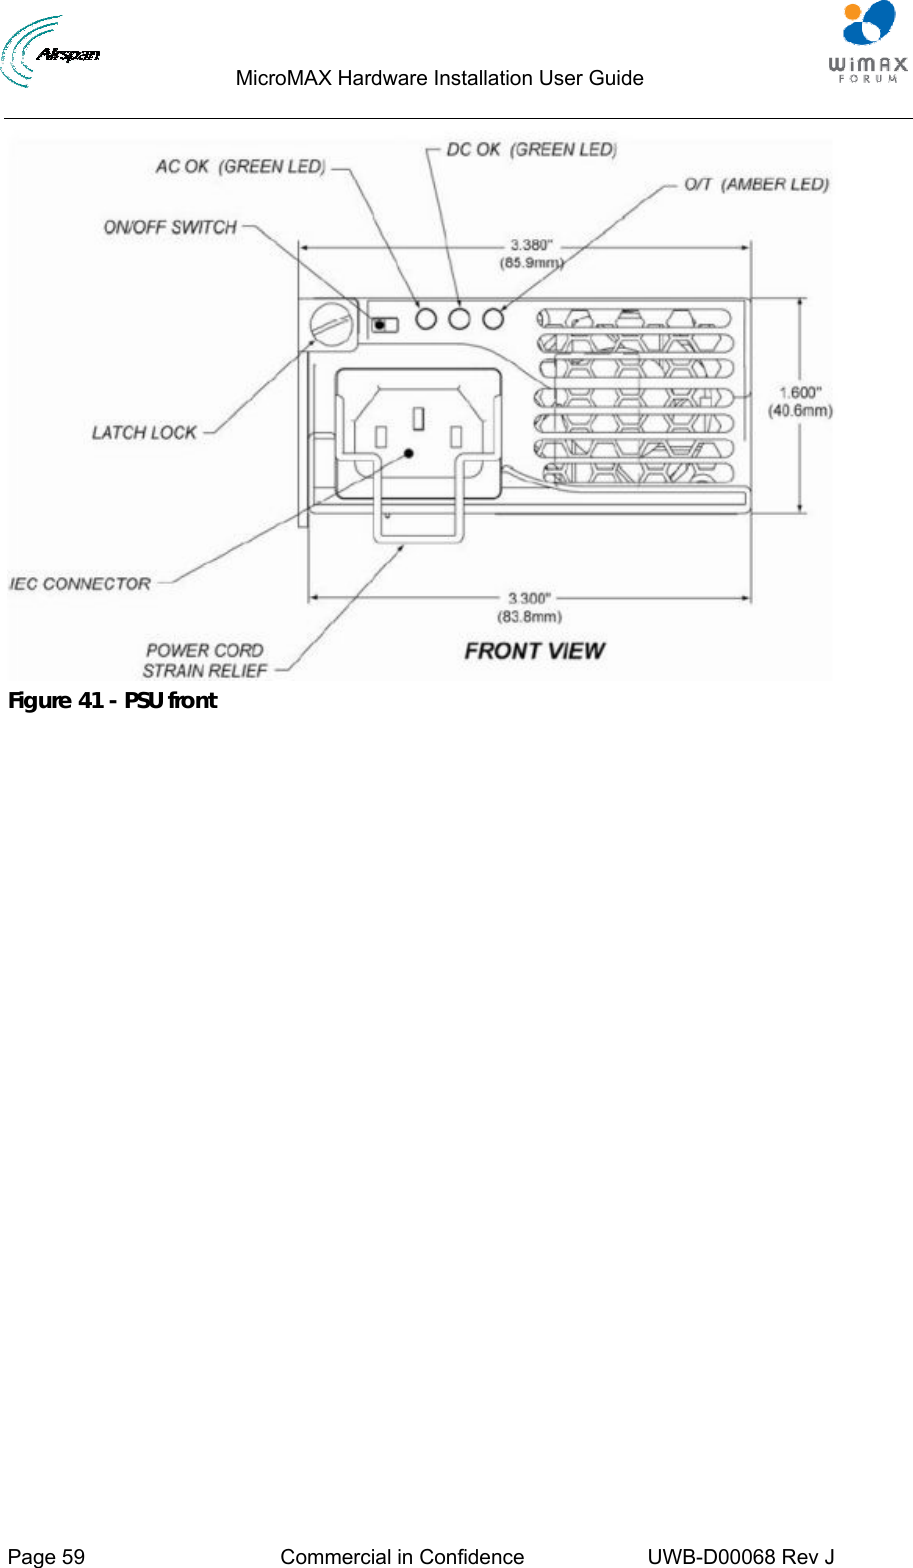                                  MicroMAX Hardware Installation User Guide     Page 59  Commercial in Confidence  UWB-D00068 Rev J    Figure 41 - PSU front 